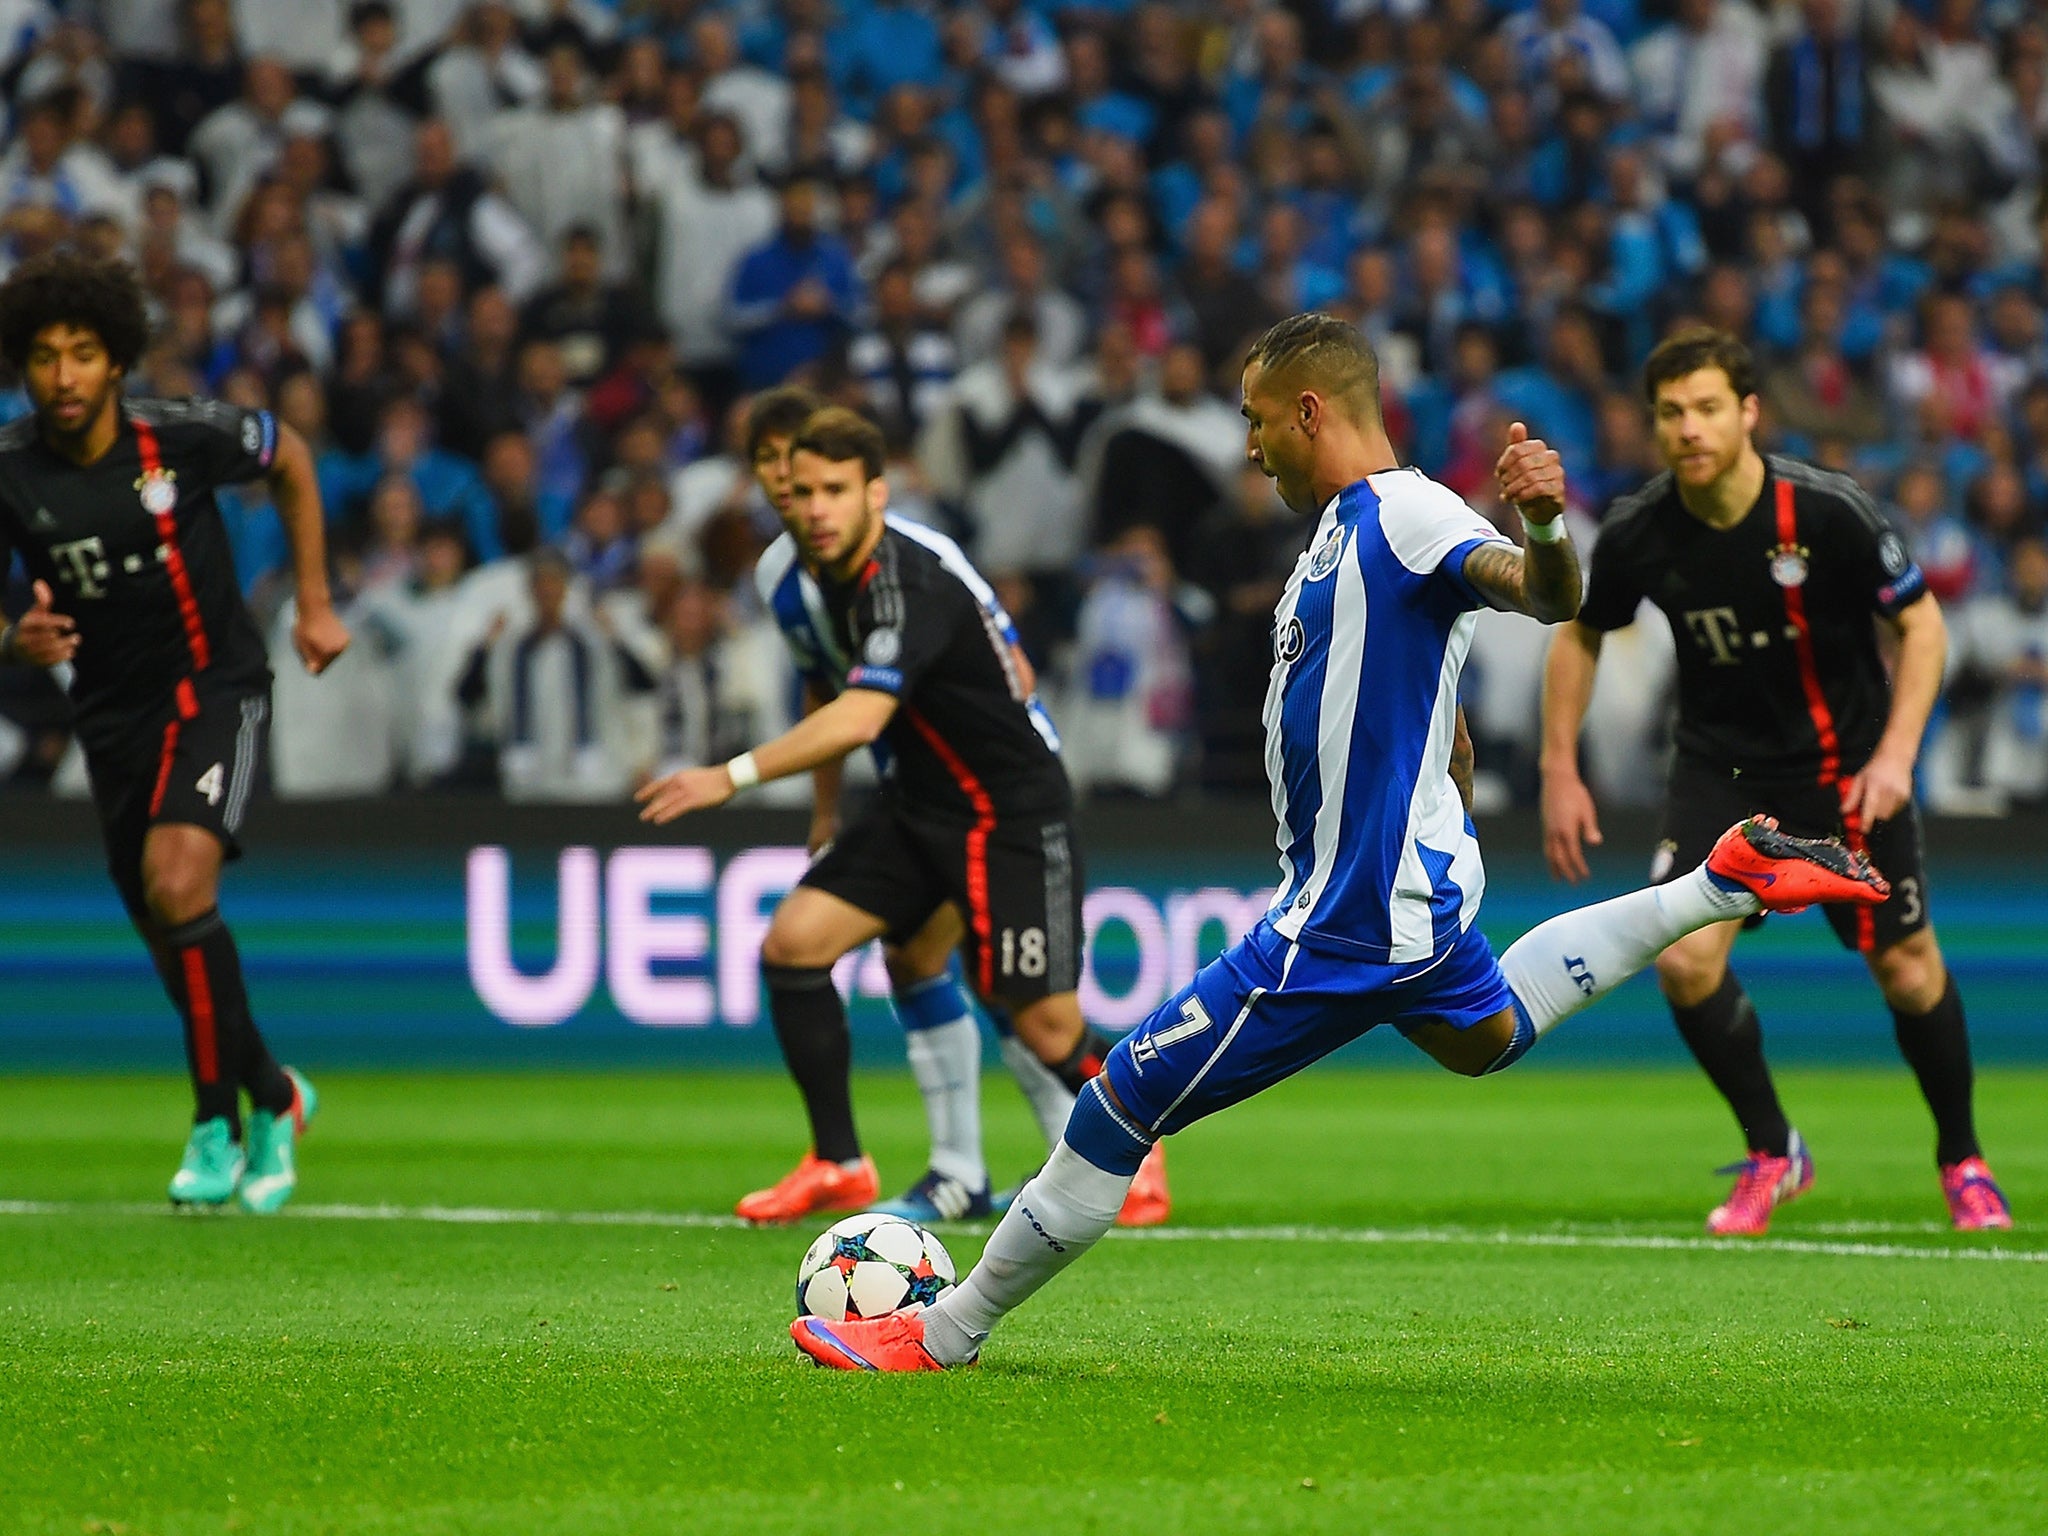 Ricardo Quaresma scored a penalty inside of just three minutes after Manuel Neuer brought down Jackson Martinez